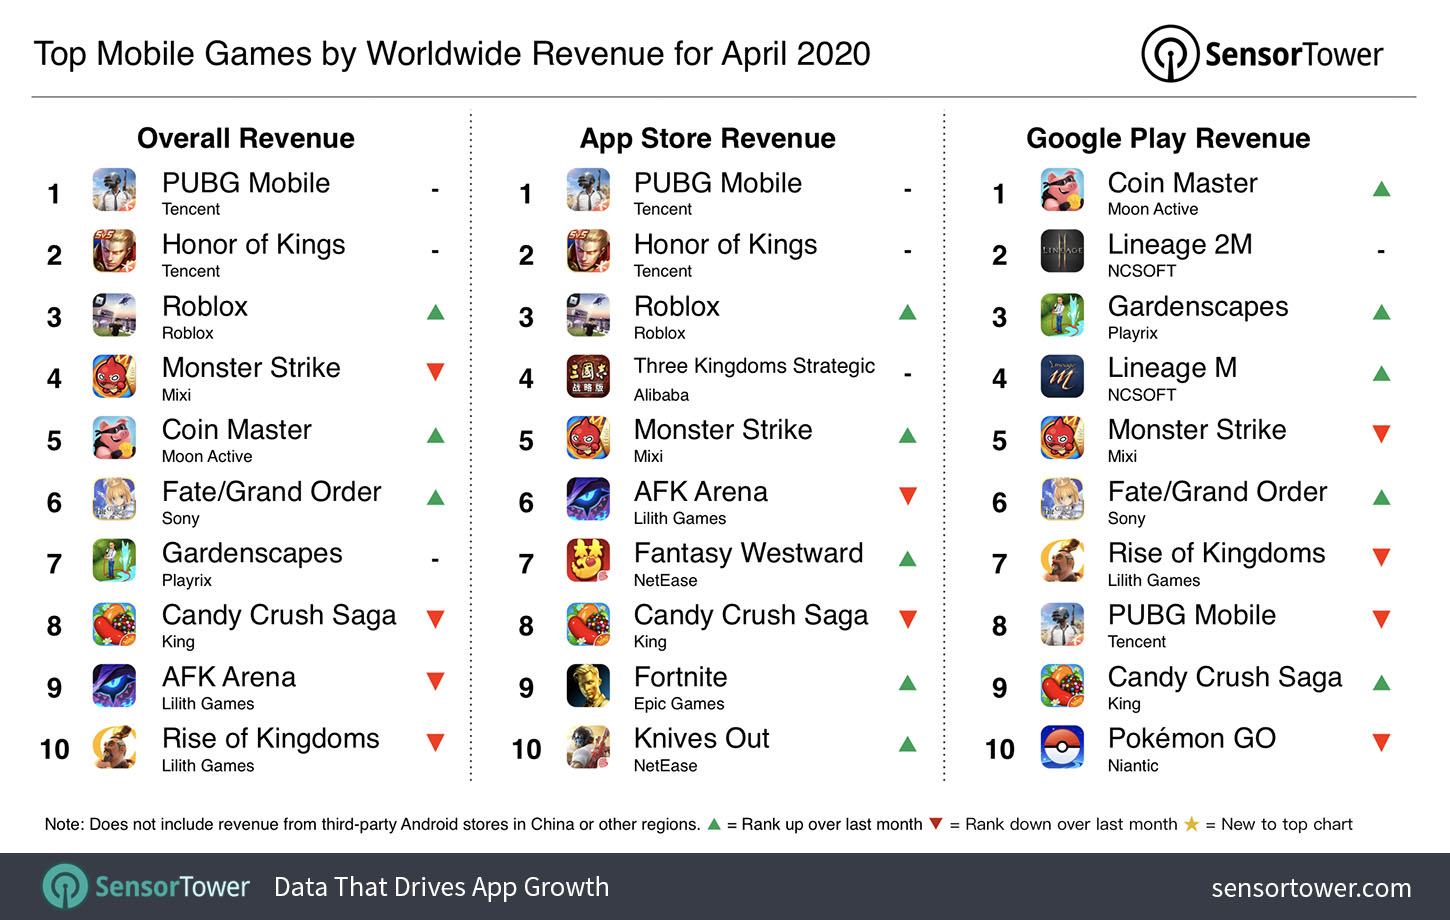 top-mobile-games-by-worldwide-revenue-april-2020.jpg